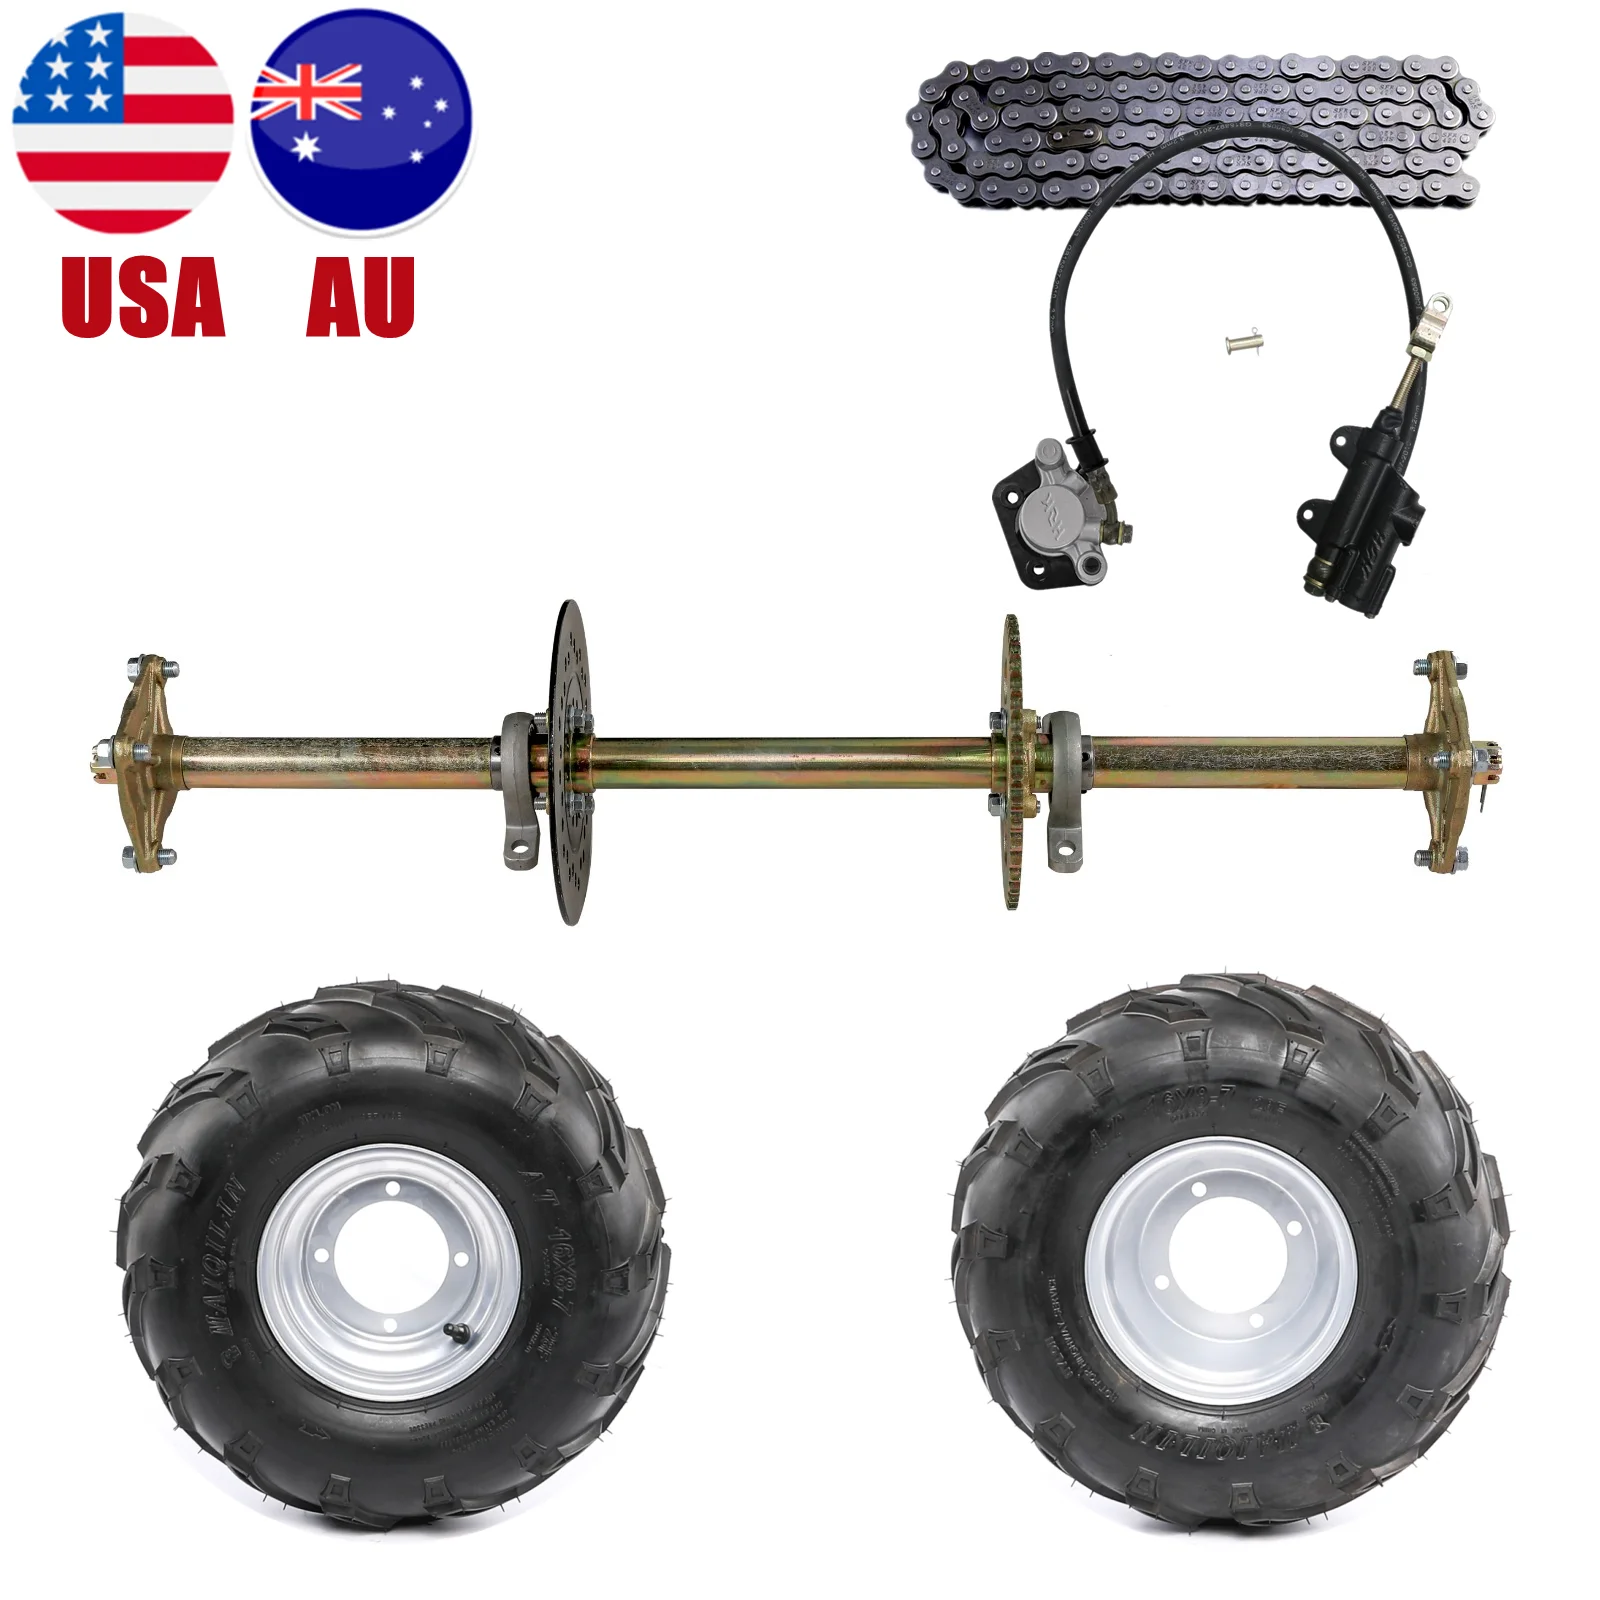 Go Kart ATV DIY Accessories 815mm Complete Rear Axle Kit with 16x8-7 Tubeless Tire & Rim 428 Chain + Brake Cylinder Assembly